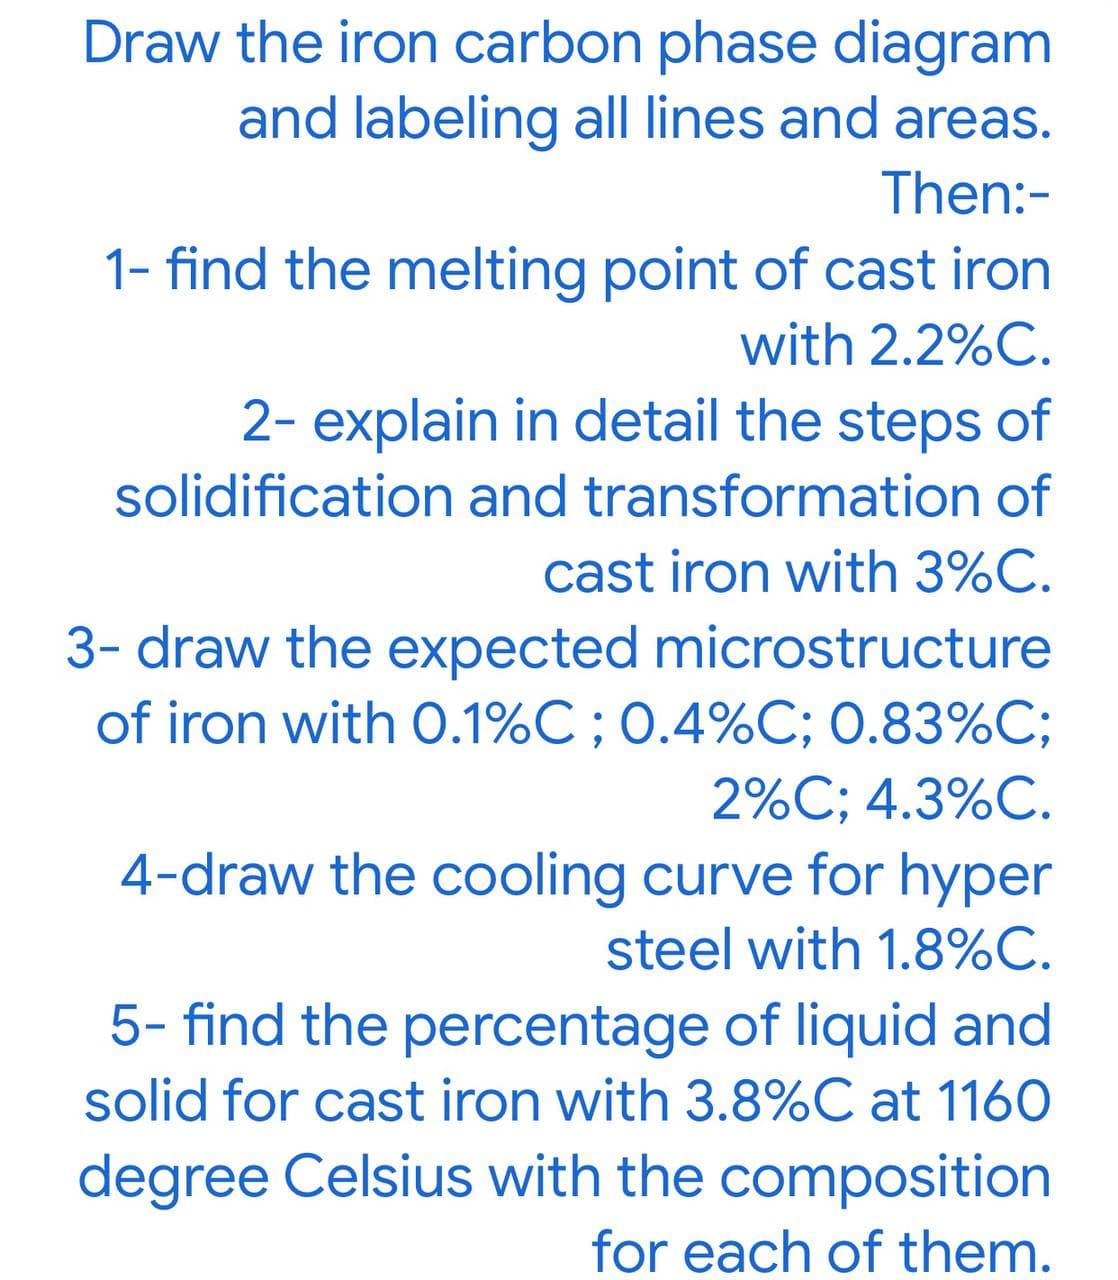 Draw the iron carbon phase diagram
and labeling all lines and areas.
Then:-
1- find the melting point of cast iron
with 2.2%C.
2- explain in detail the steps of
solidification and transformation of
cast iron with 3%C.
3- draw the expected microstructure
of iron with 0.1%C ; 0.4%C; 0.83%C;
2%C; 4.3%C.
4-draw the cooling curve for hyper
steel with 1.8%C.
5- find the percentage of liquid and
solid for cast iron with 3.8%C at 1160
degree Celsius with the composition
for each of them.
